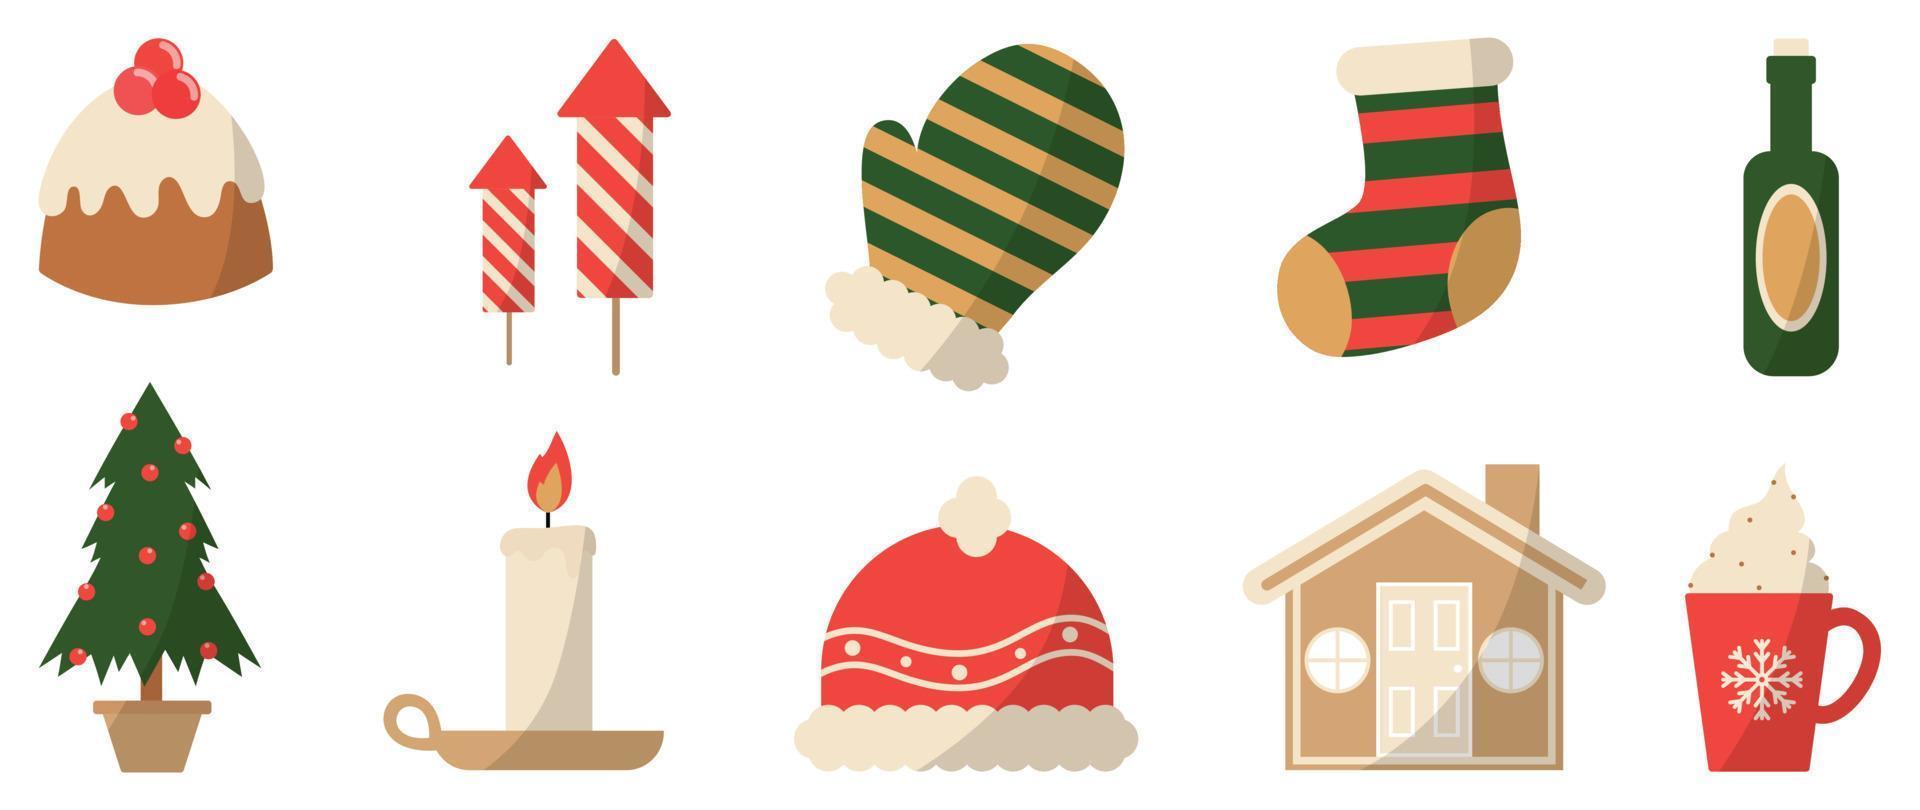 Set of winter vibrant christmas element vector illustration. Collection of christmas tree, cake, candle, glove, sock, house, winter hat, bottle. Design for sticker, card, poster, invitation, greeting.